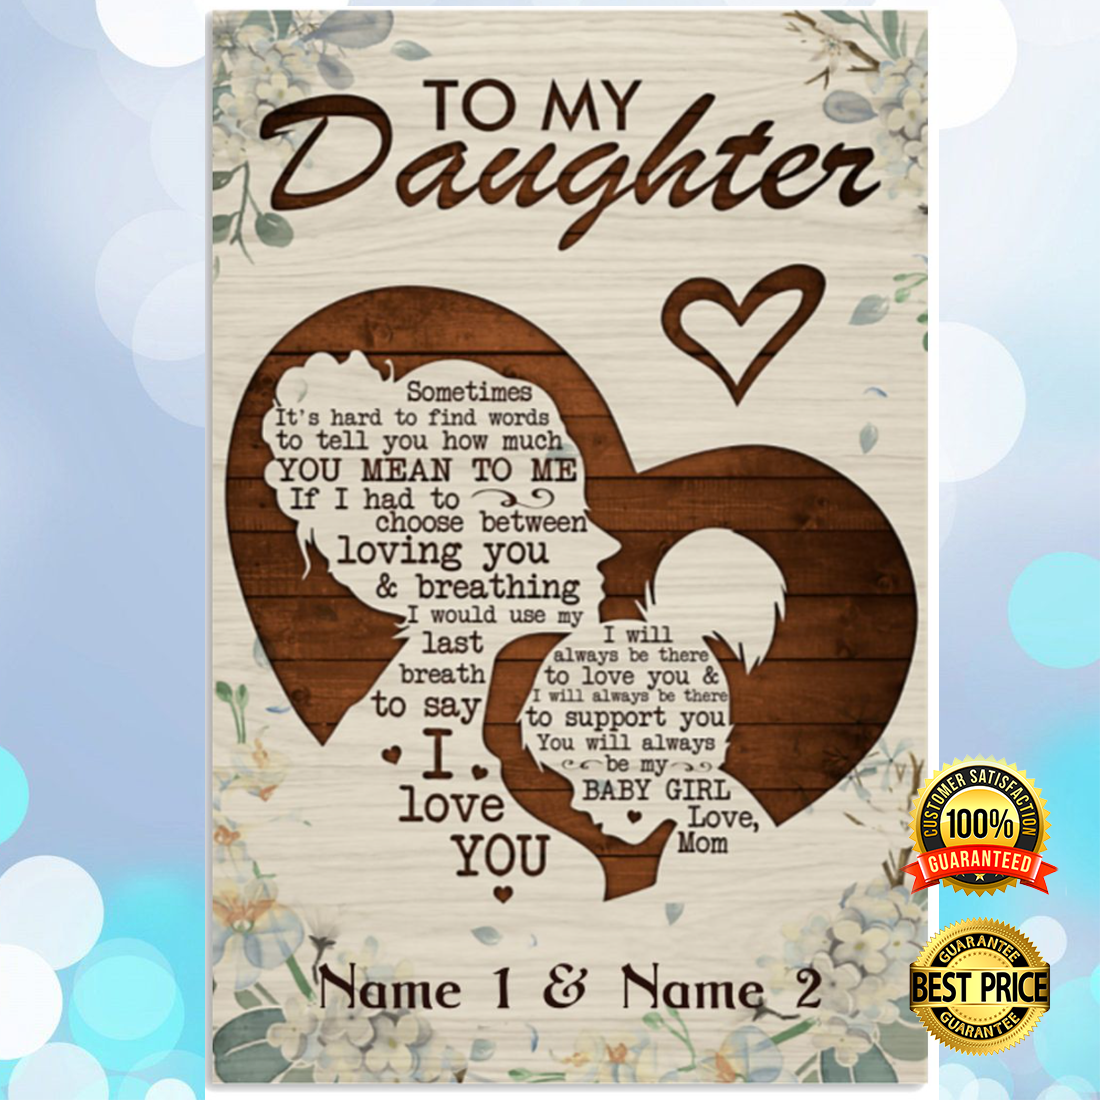 Personalized to my daughter sometimes it's hard to find words to tell you how much you mean to me poster 5